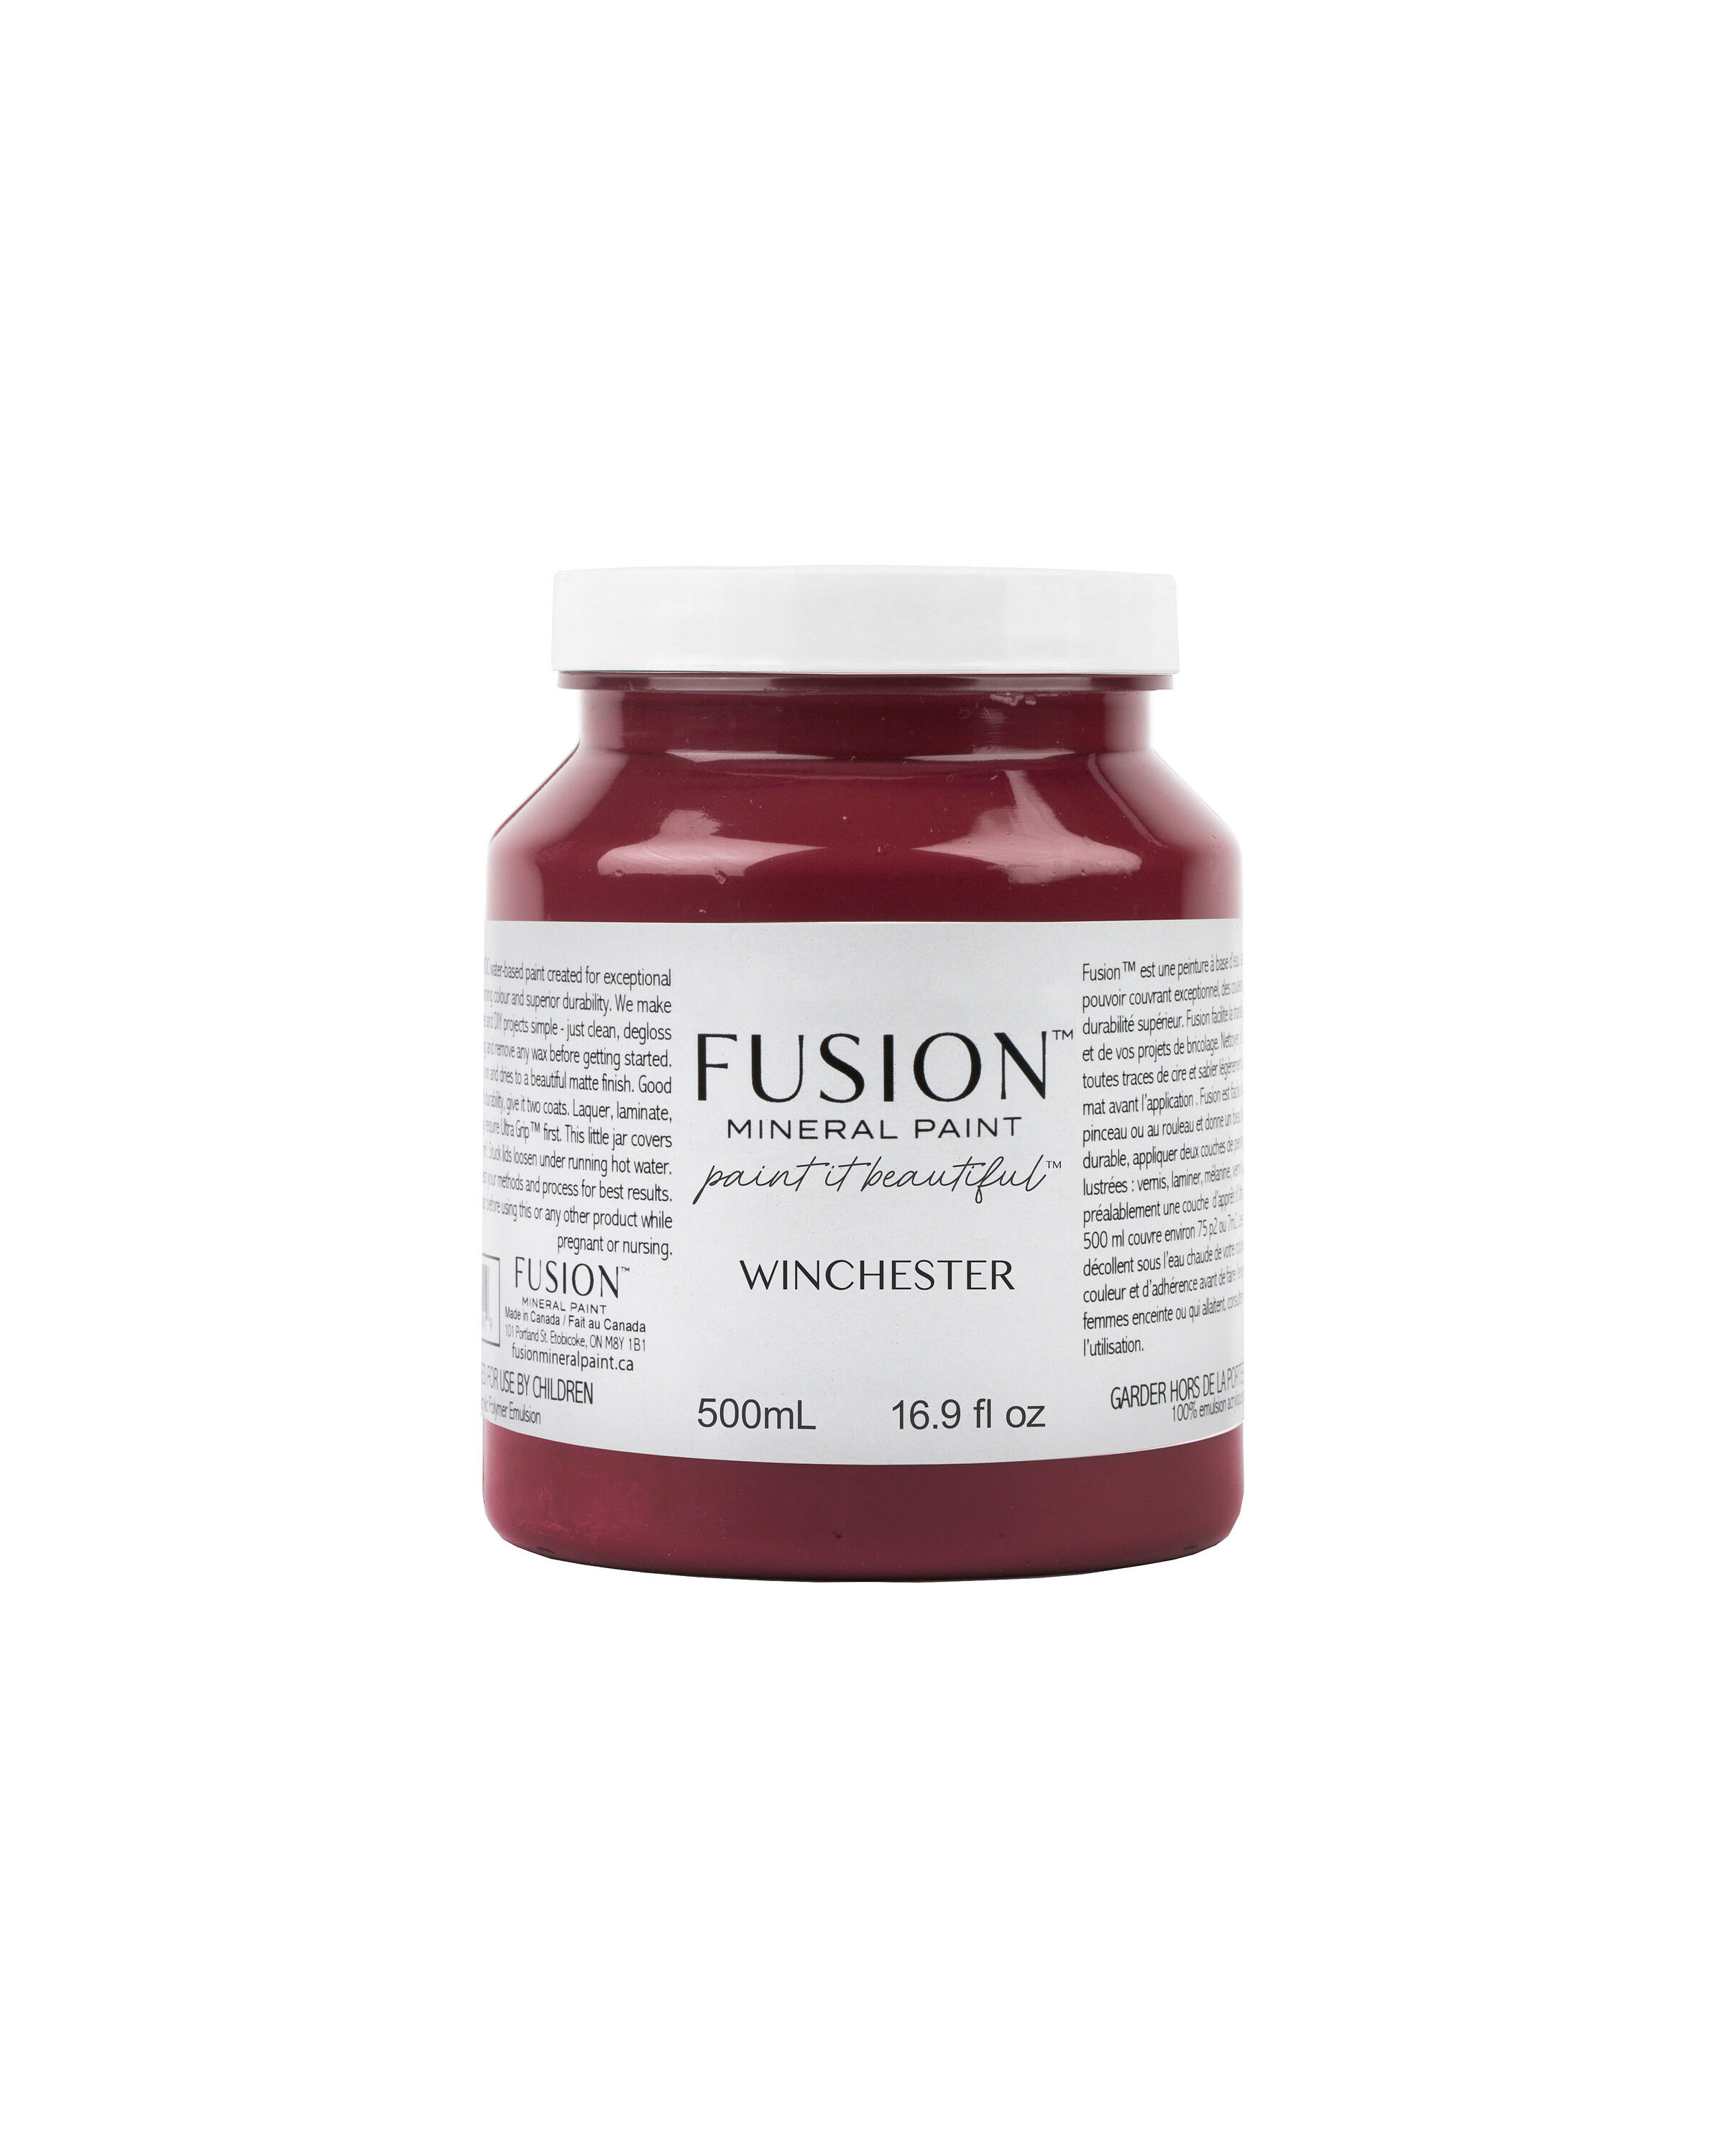 Fusion Mineral Paint vernice ecologica color Fusion Mineral Paint vernice ecologica color rosso intenso